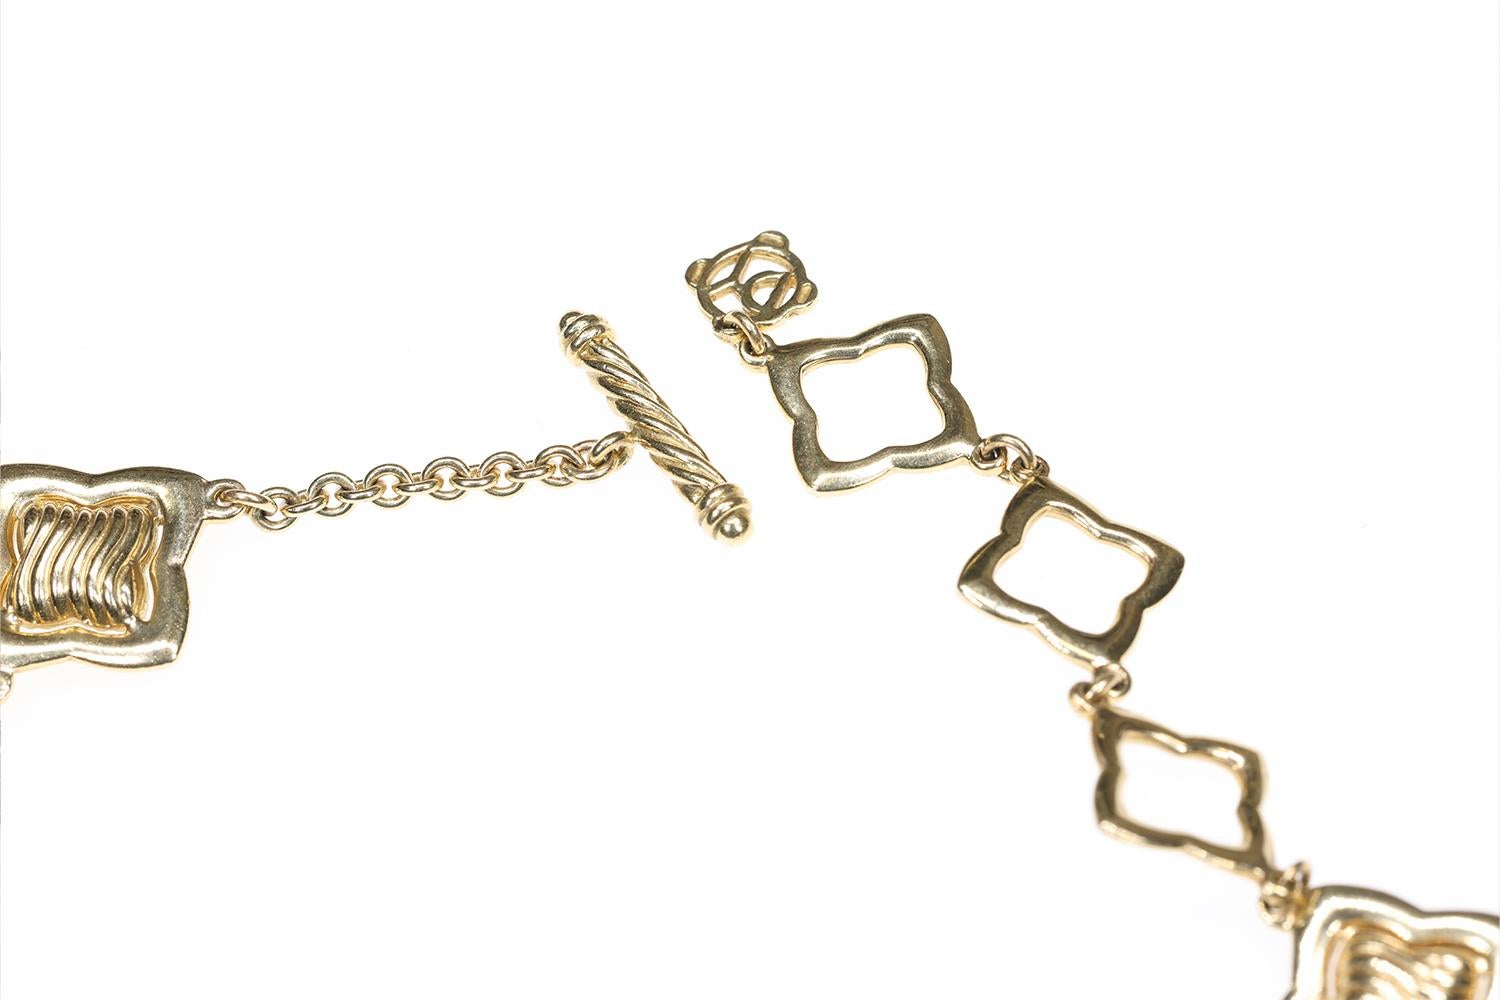 Rare David Yurman Quatrefoil 18K Solid Yellow Gold Necklace Limited Series Piece In Excellent Condition For Sale In Manchester By The Sea, MA